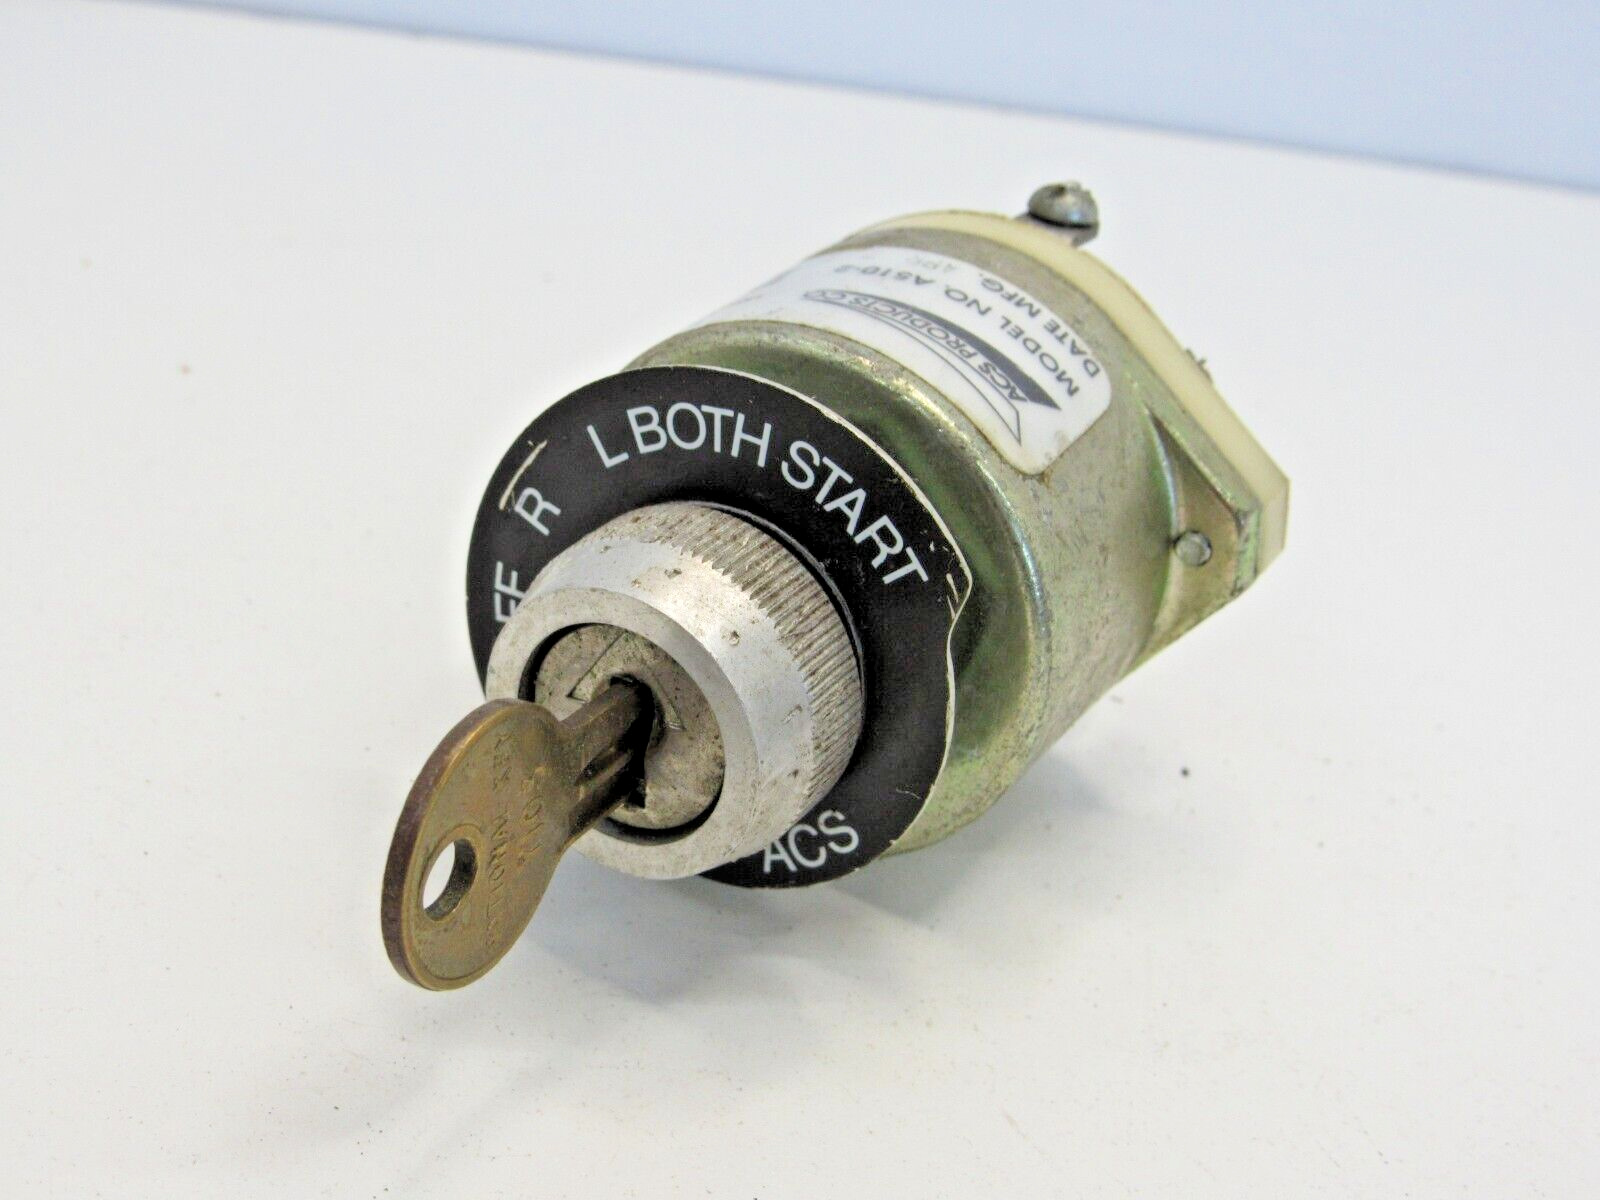 ACS Products Co. Magneto /  Ignition Switch Model No. A510-2 FAA-PMA #GK-1